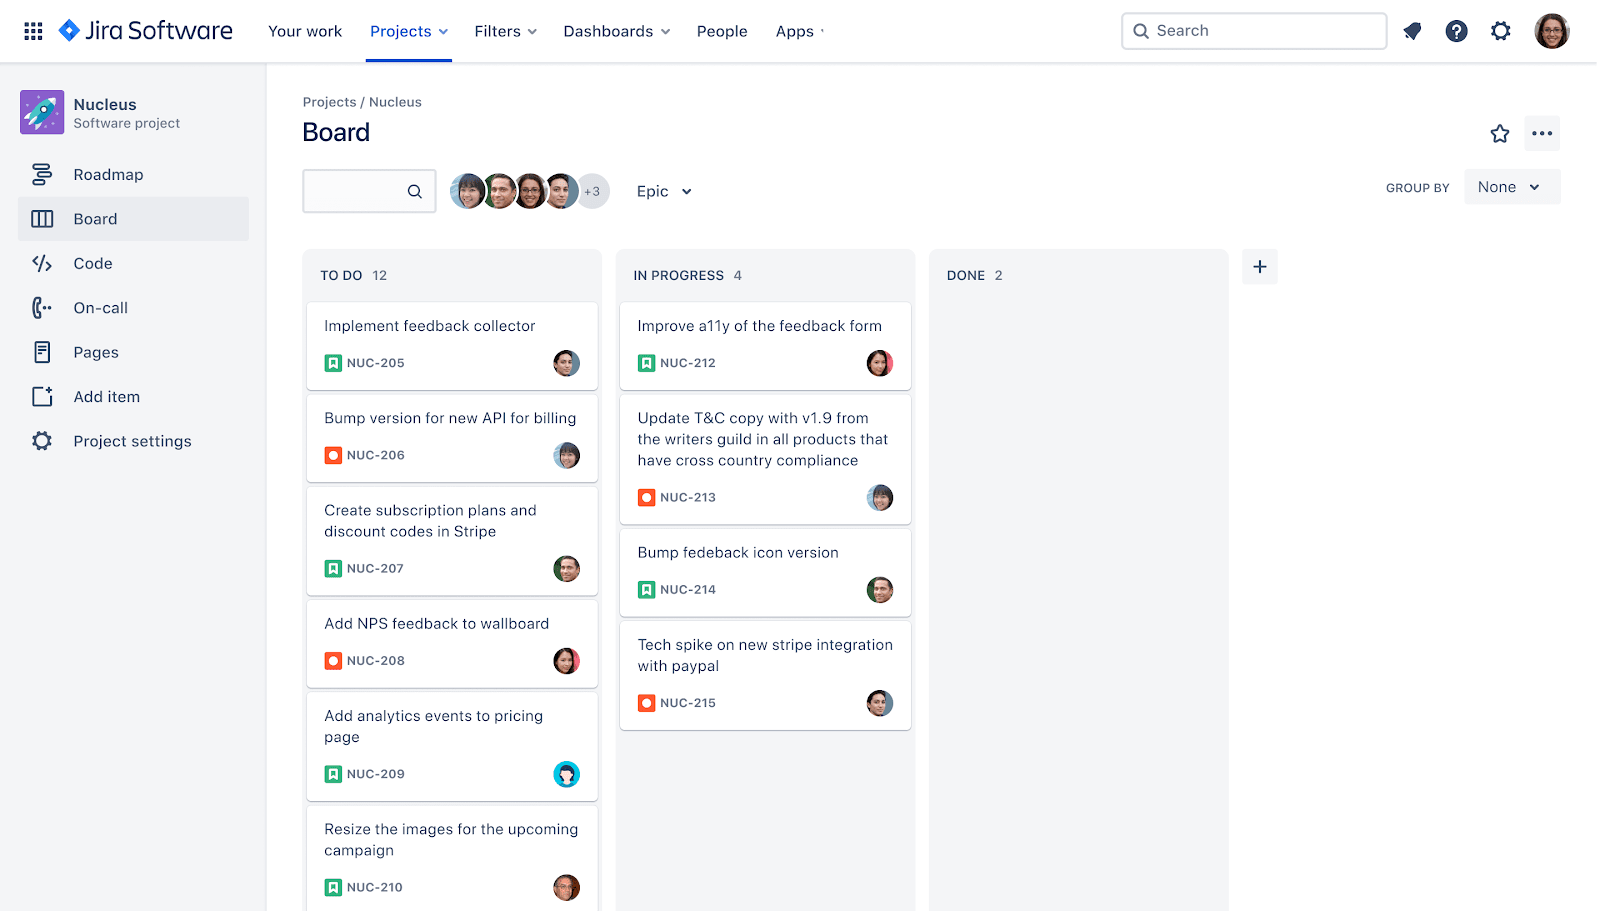 Screenshot of a typical Jira Kanban board showing tasks to be done and tasks in progress.